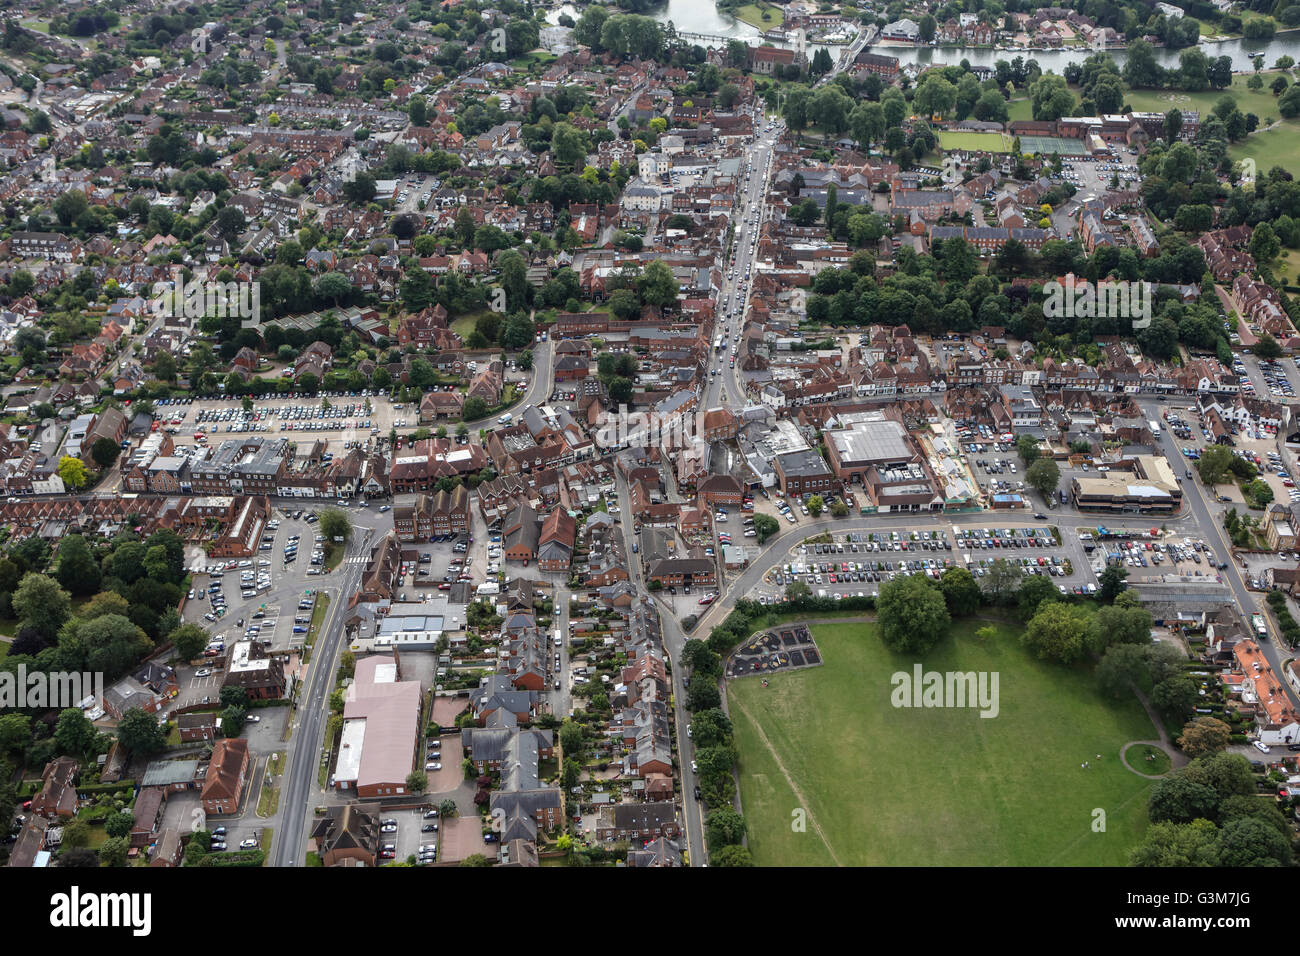 An aerial view of the town centre of Marlow, Buckinghamshire Stock Photo